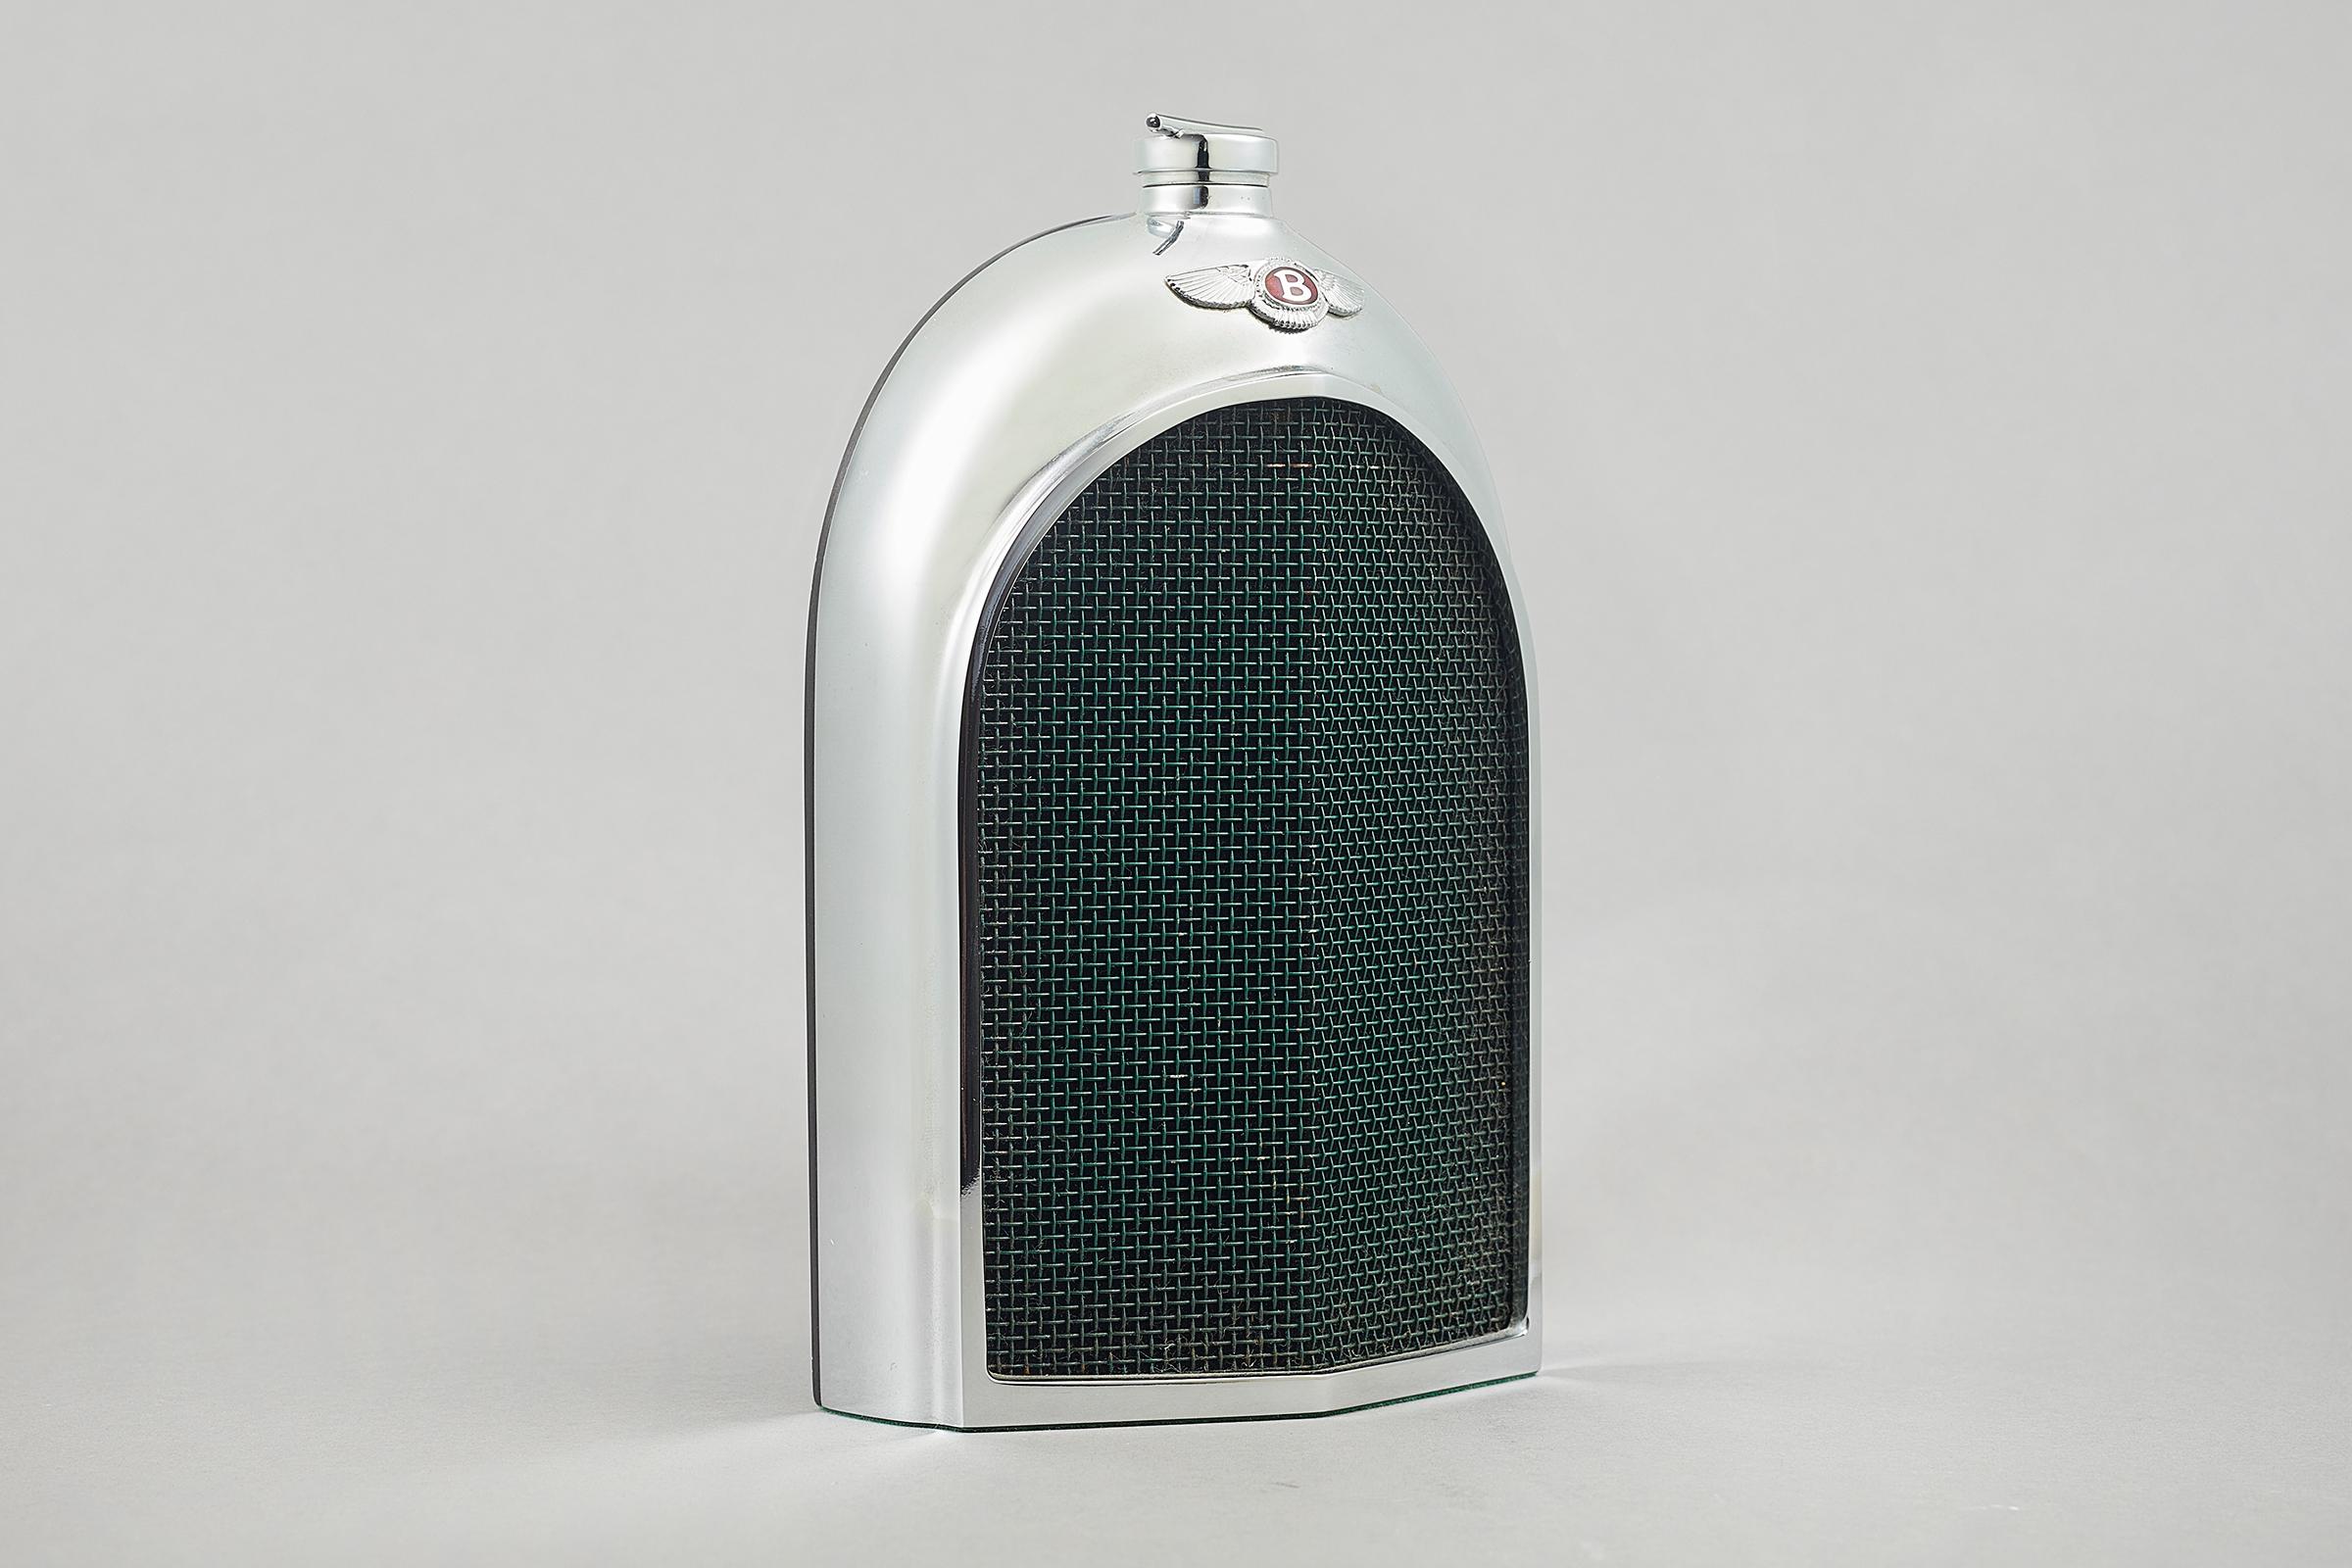 A midcentury Ruddspeed automobile decanter, circa 1960, in the shape of a Bentley radiator grille. Chromed metal with an enamelled green mesh grille and winged badge, and screw top. Designed and manufactured by Ken Rudd and Ruddspeed Ltd. of